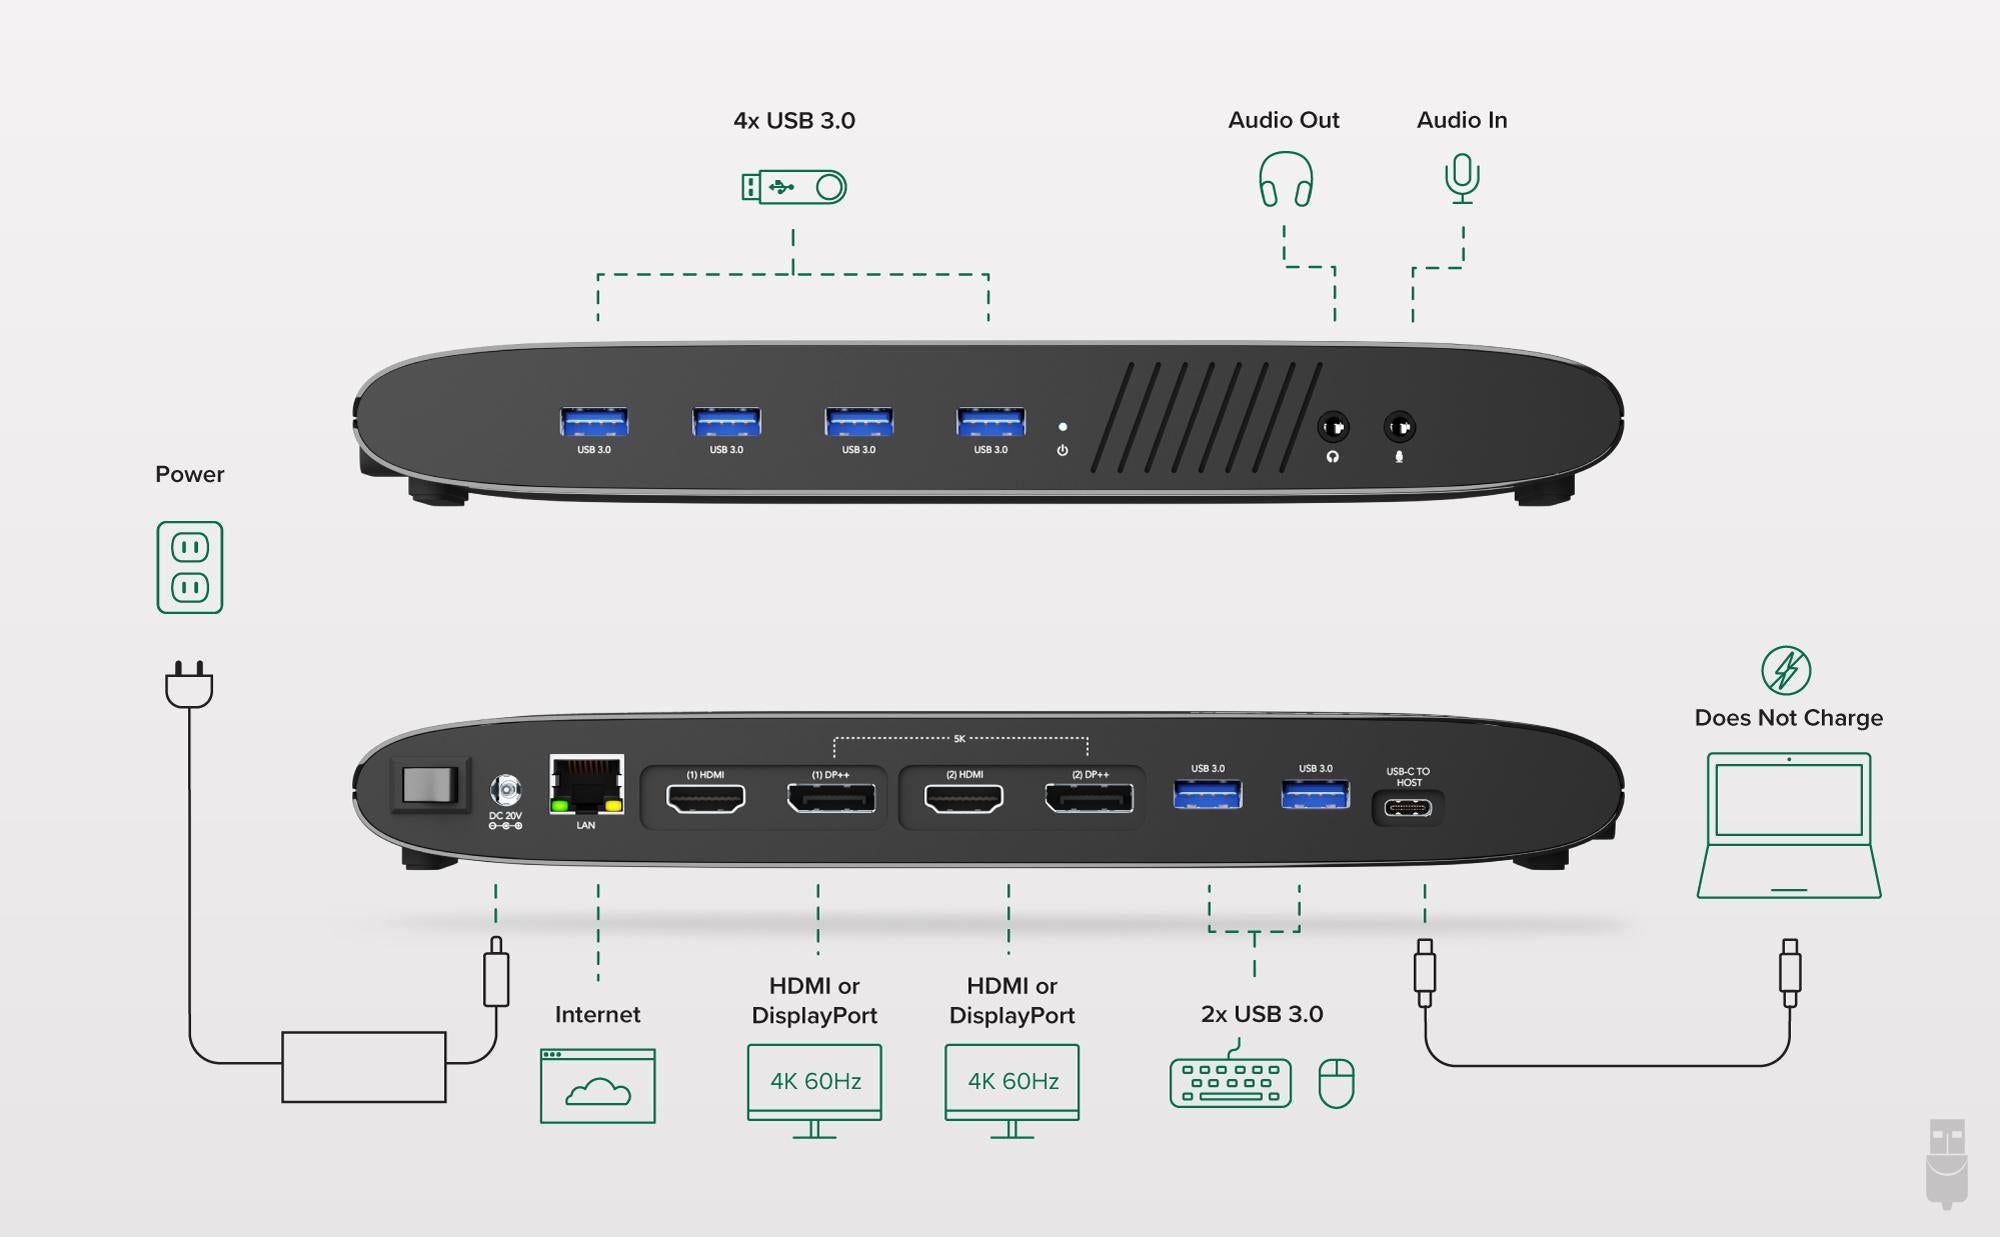 UD-6950H ports in detail